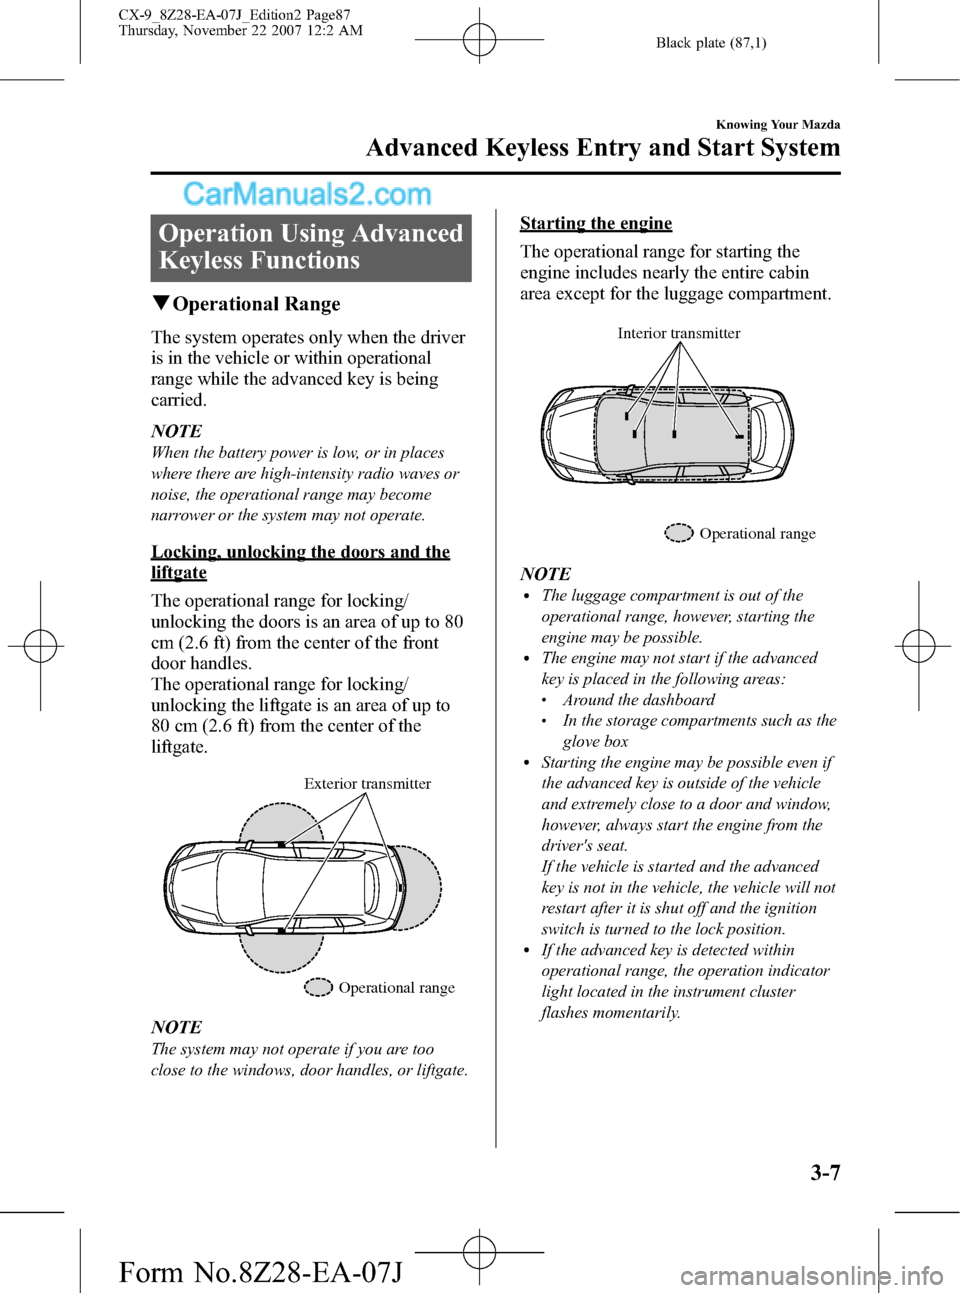 MAZDA MODEL CX-9 2008  Owners Manual (in English) Black plate (87,1)
Operation Using Advanced
Keyless Functions
qOperational Range
The system operates only when the driver
is in the vehicle or within operational
range while the advanced key is being
